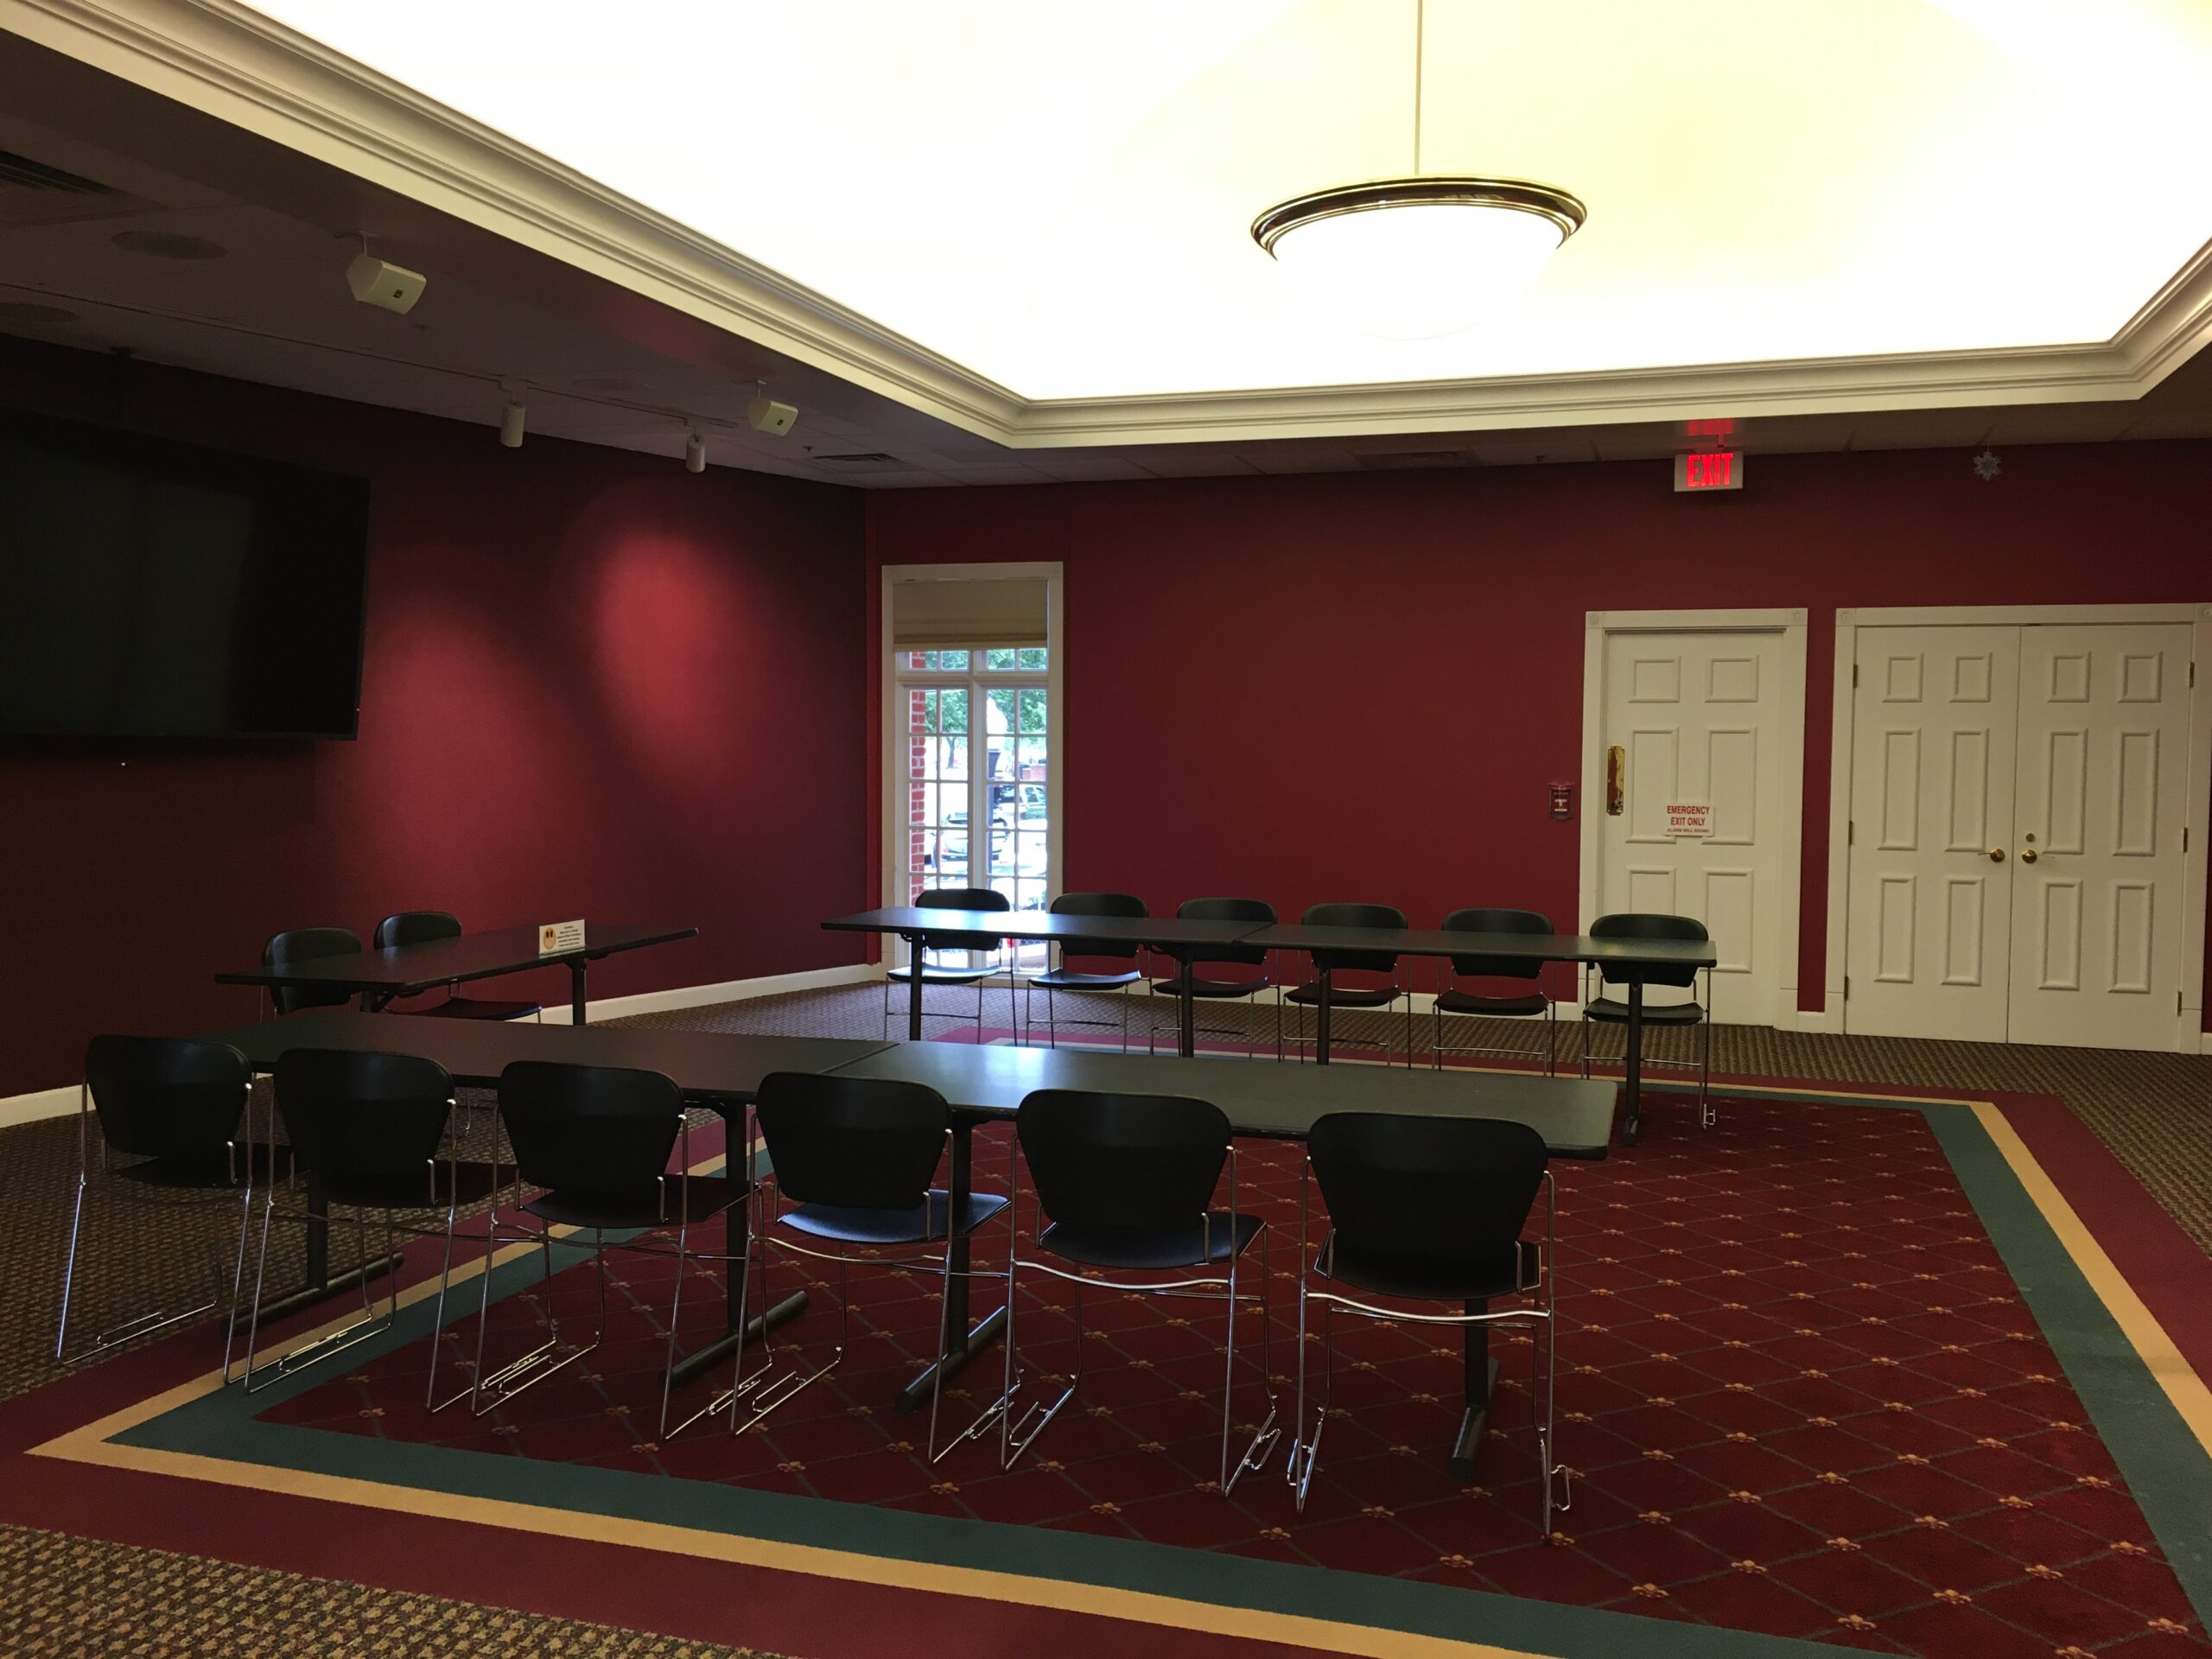 Dunning Room set up with chairs and tables